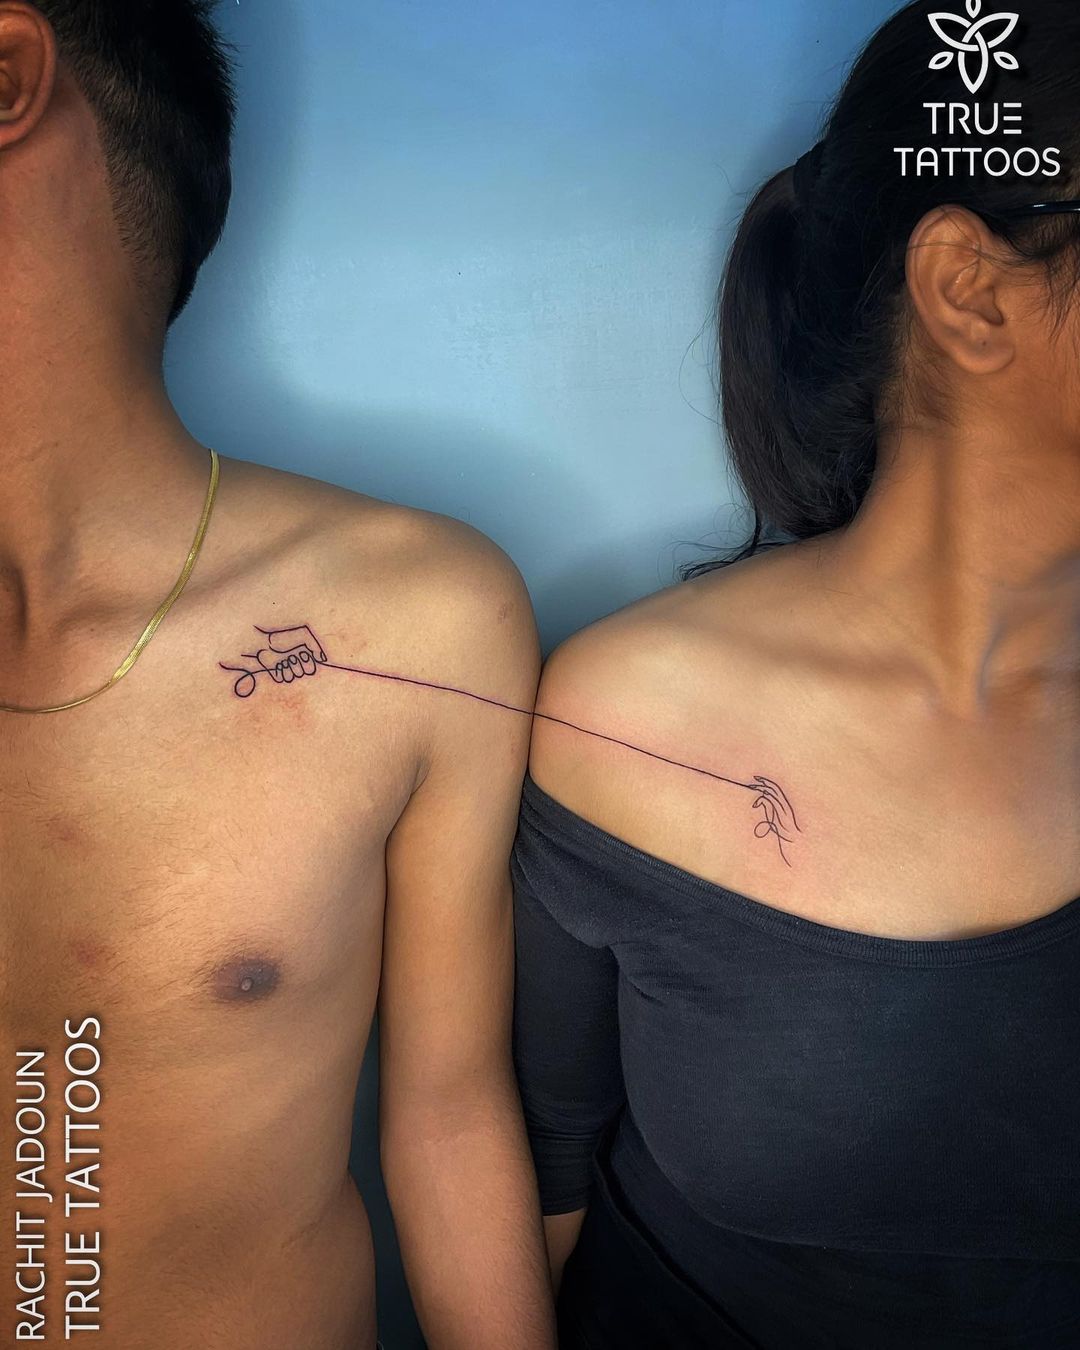 Aggregate 96+ about love couple tattoo pics latest .vn